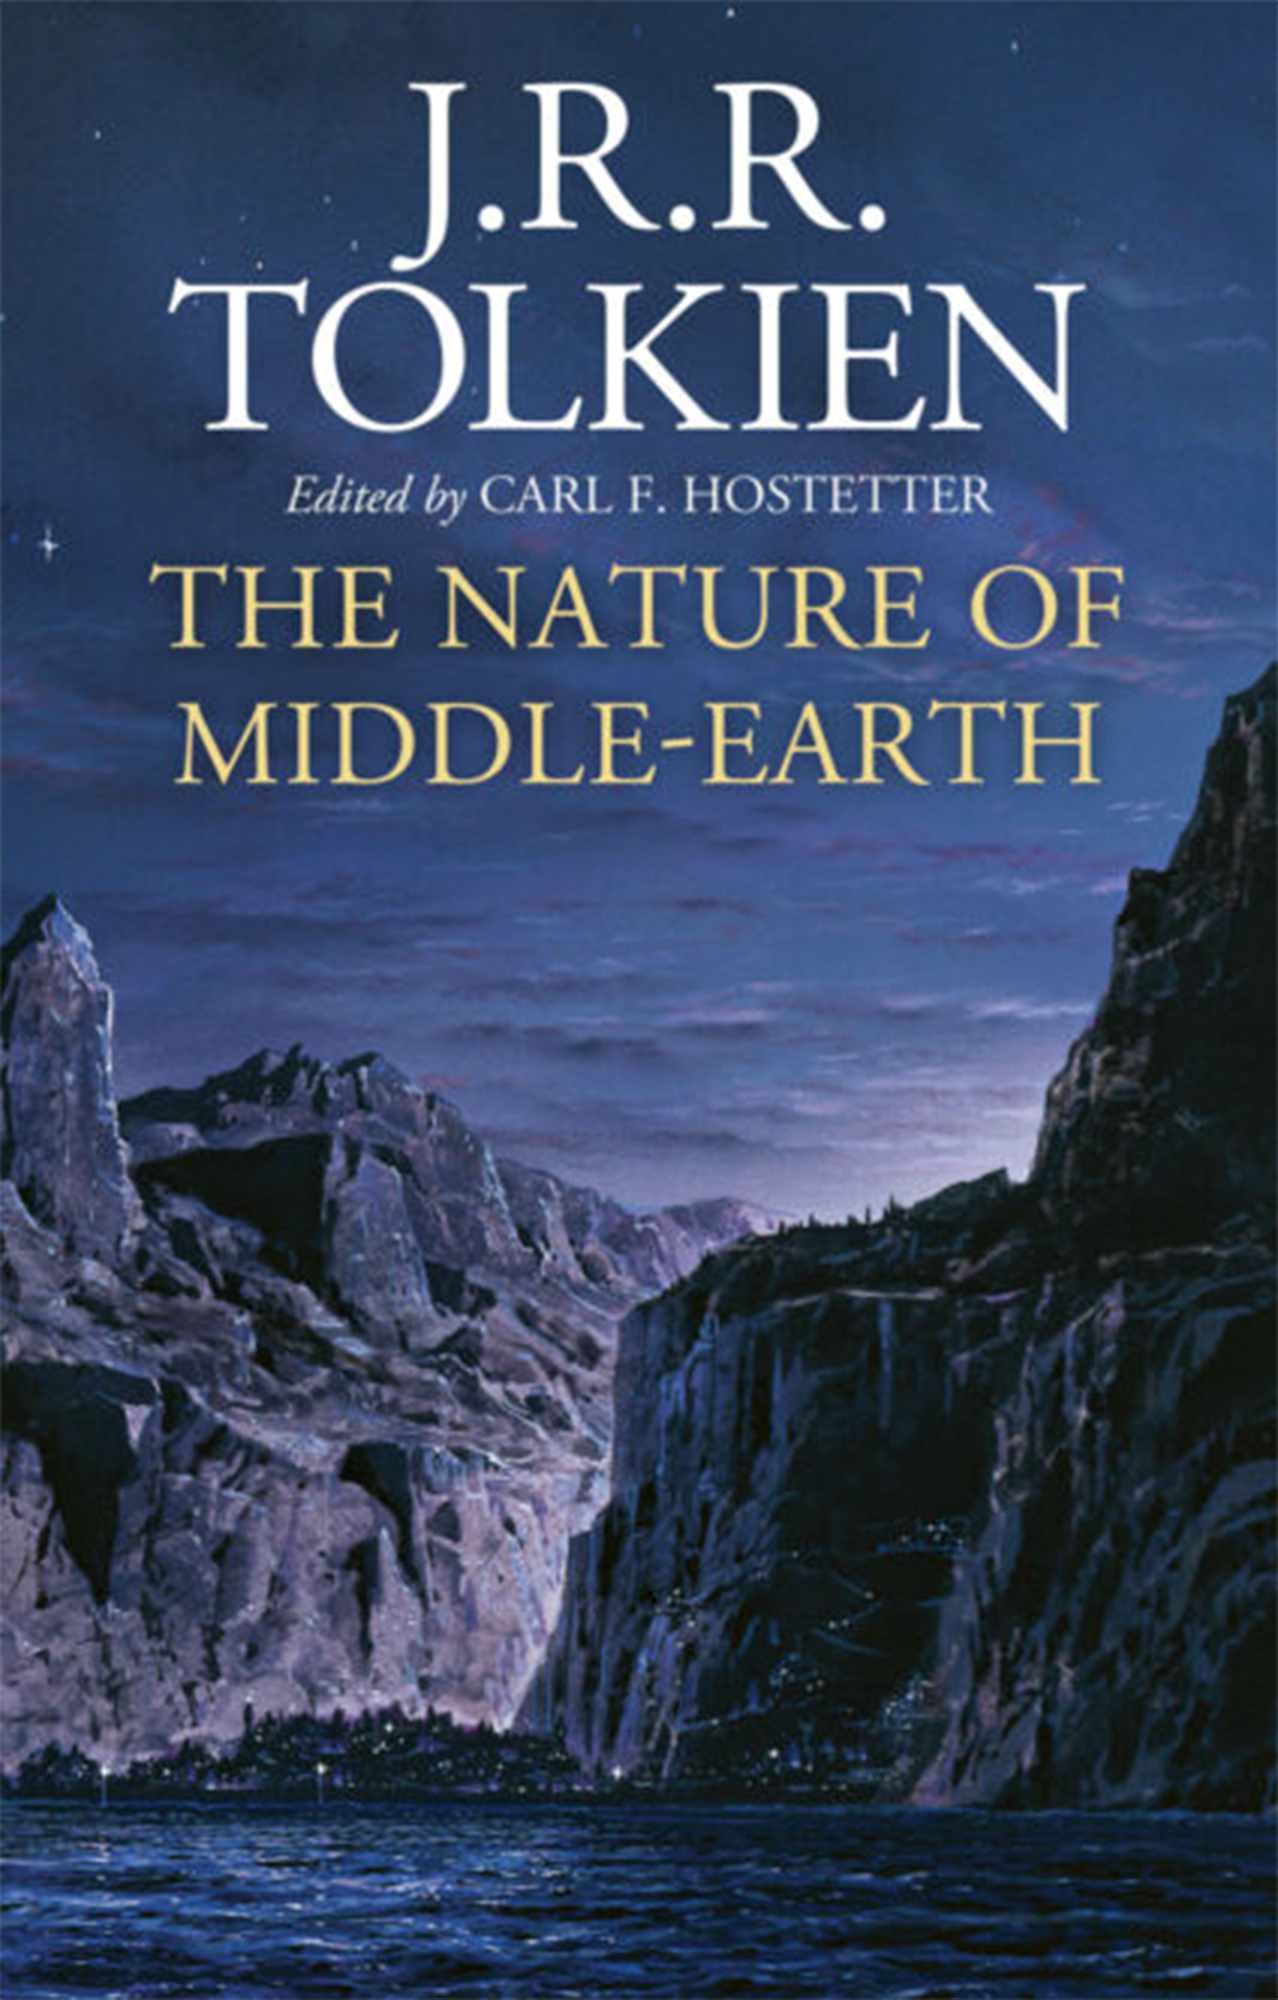 The Nature of Middle Earth, by J.R.R. Tolkien